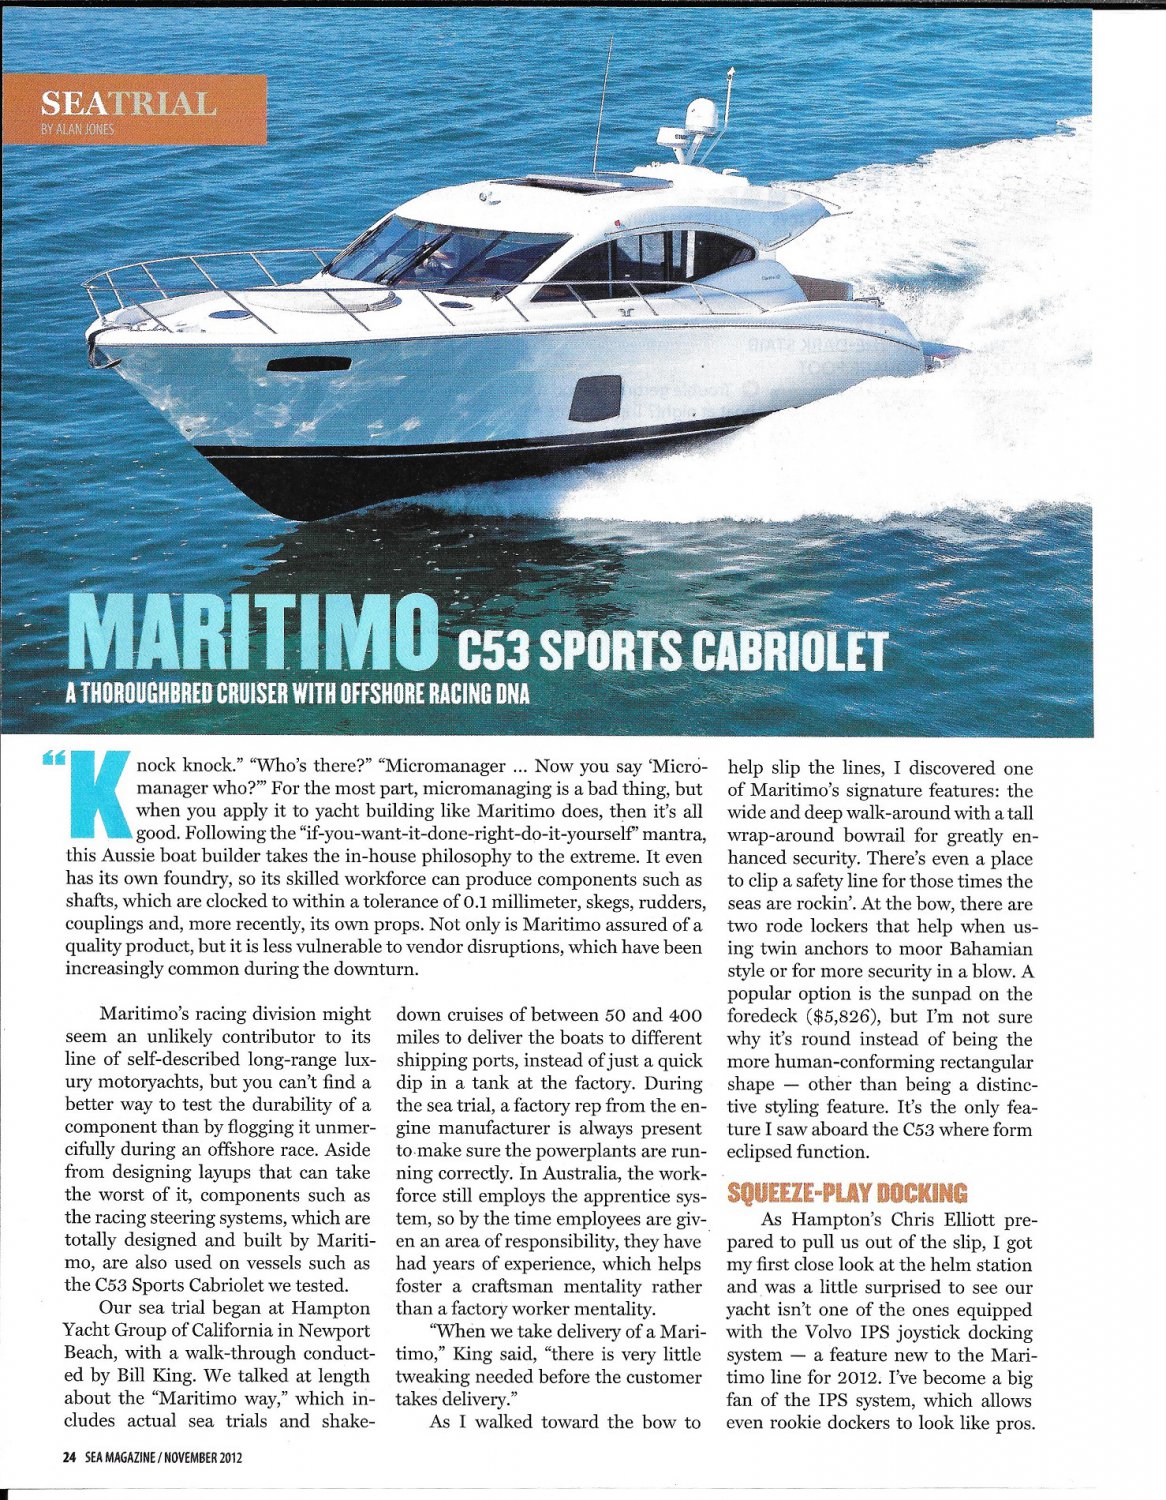 2012 Maritimo C53 Sports Cabriolet Yacht Review- Boat Specs & Nice Photos